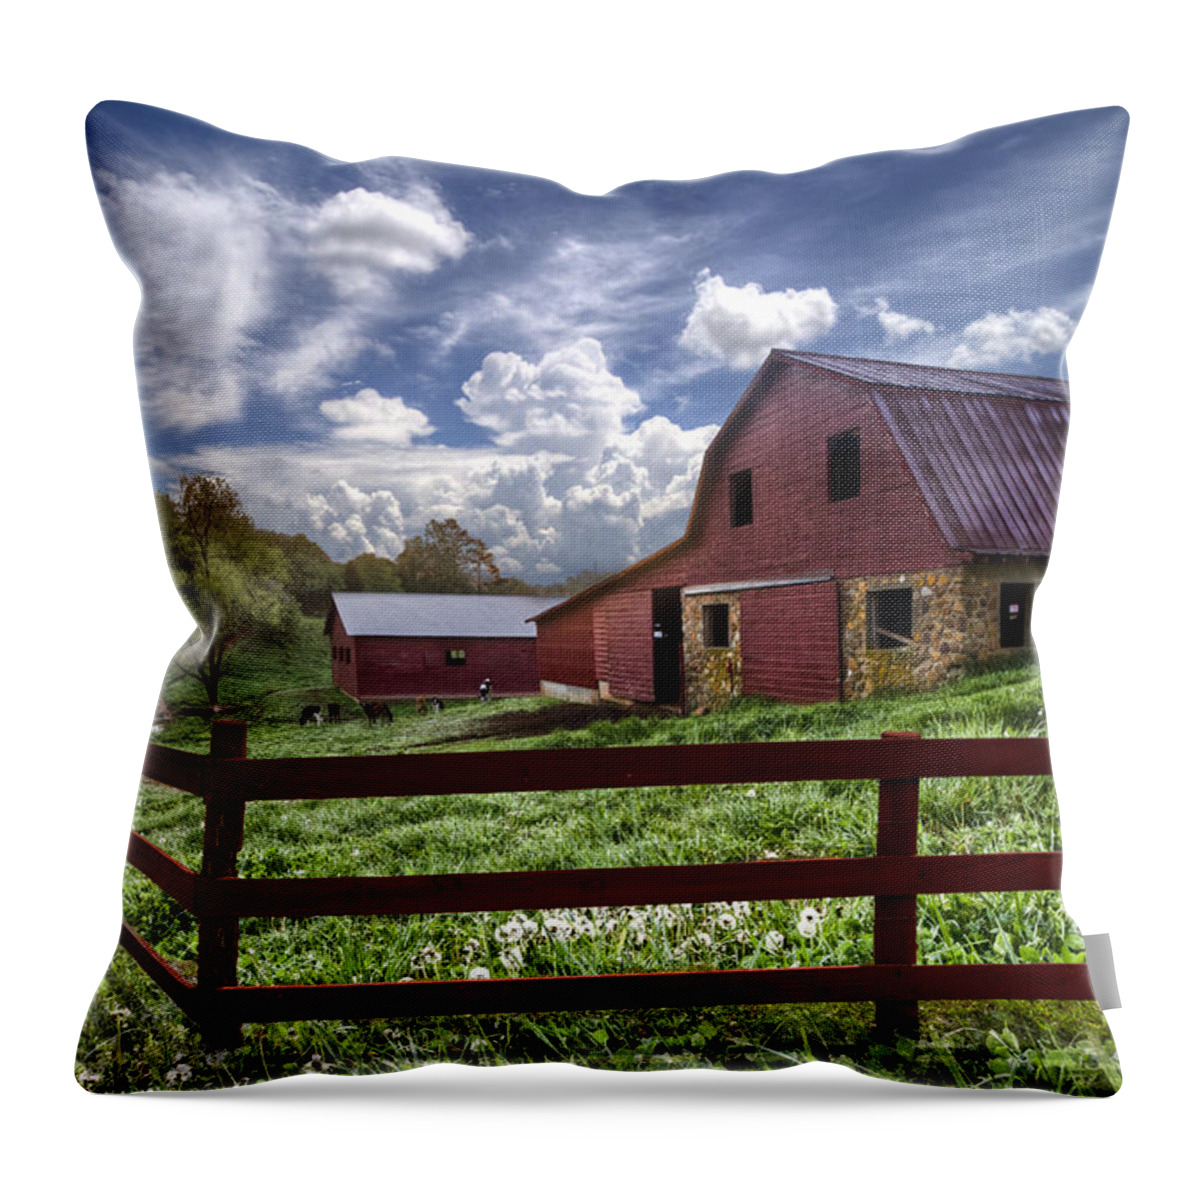 Clouds Throw Pillow featuring the photograph All American #2 by Debra and Dave Vanderlaan